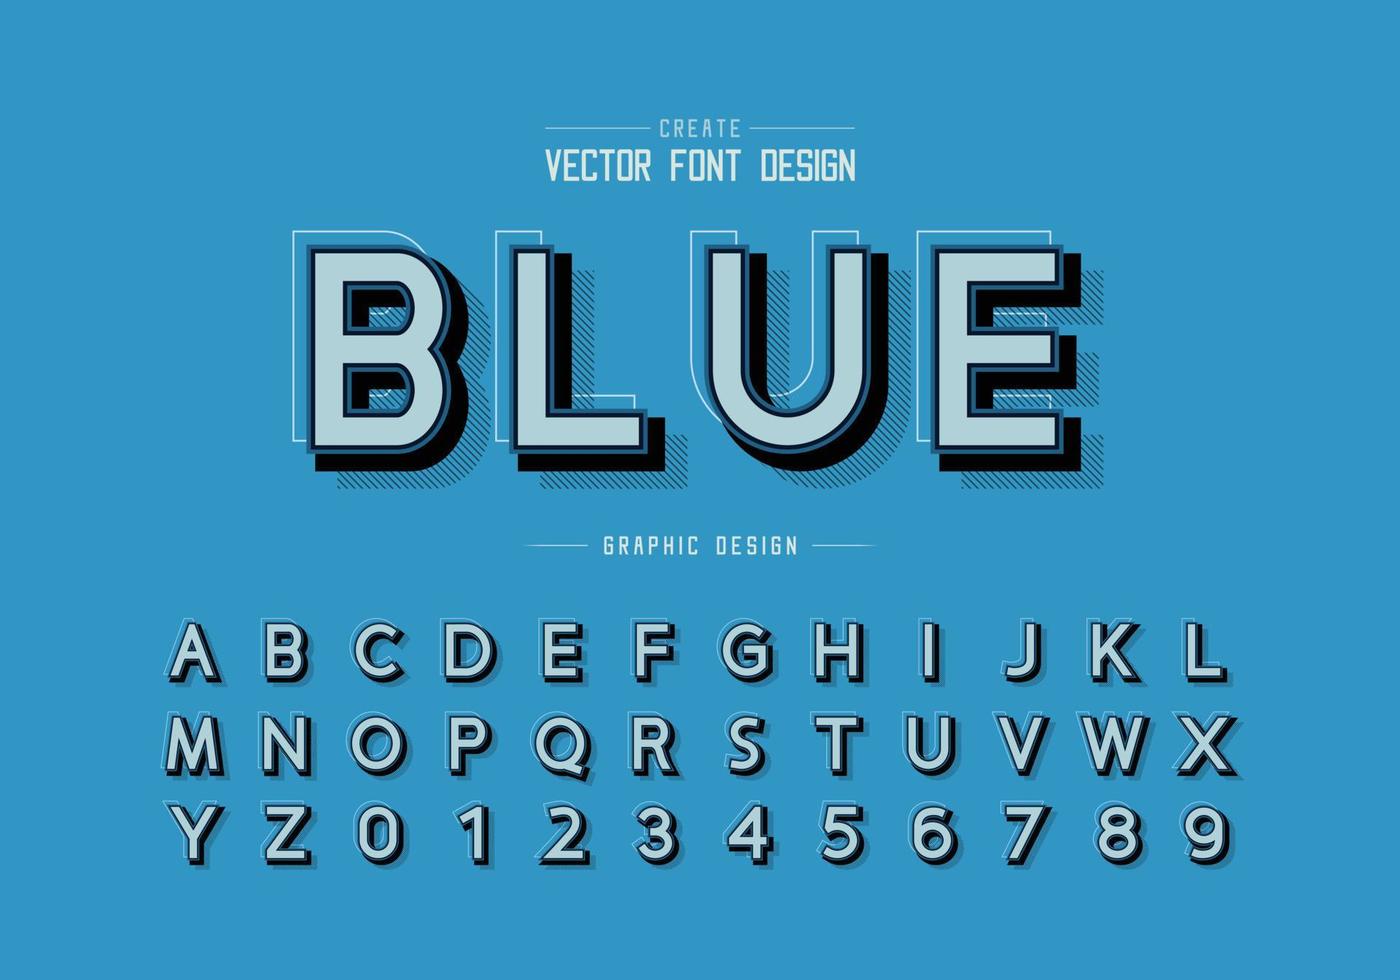 Shadow and line Font vector, Alphabet design typeface and number, Graphic text on background vector